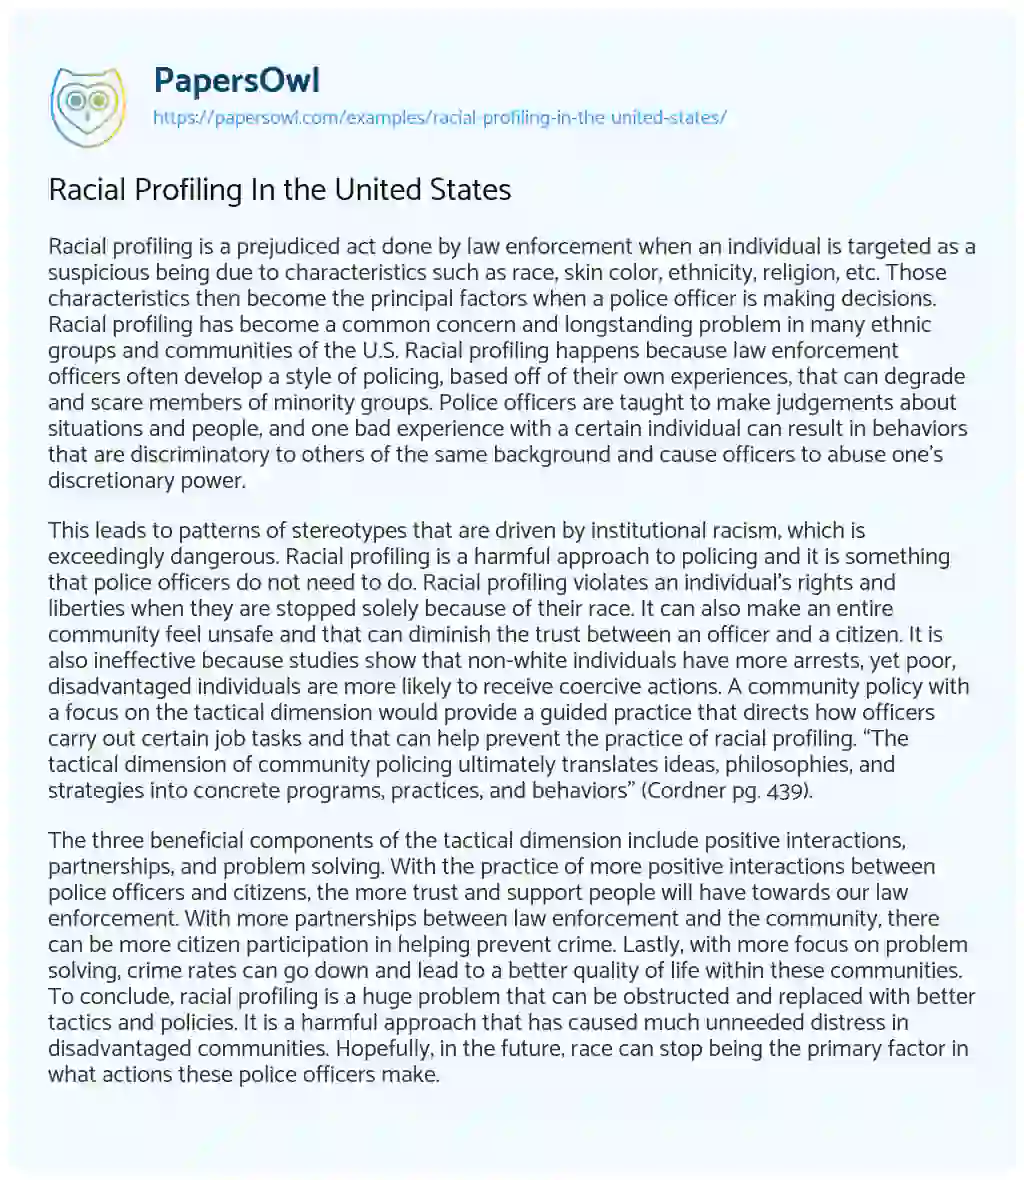 Racial Profiling in the United States essay